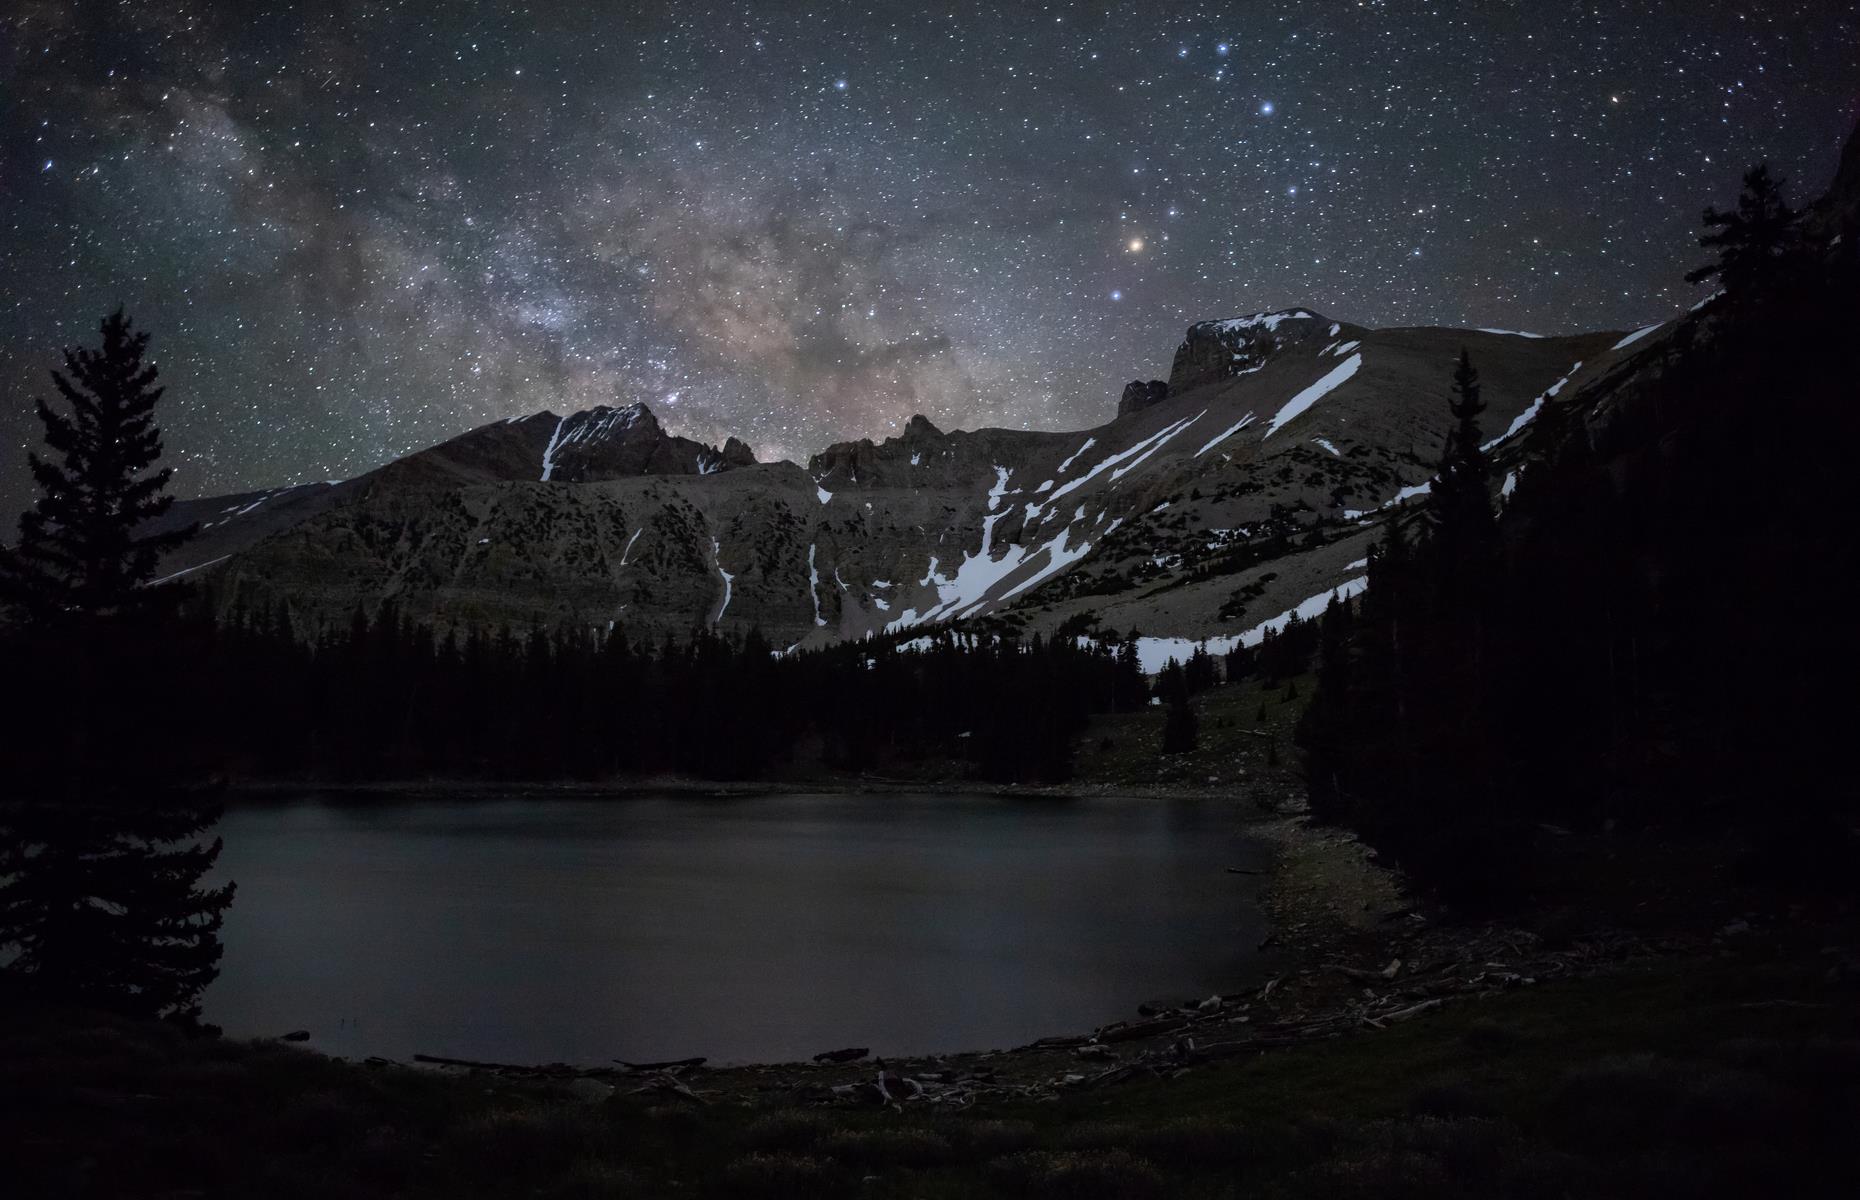 <p>An International Dark Sky Park since 2016, Nevada’s Great Basin National Park typically offers a full bounty of celestial events. The 2020 Astronomy Festival is scheduled for 17–19 September (<a href="https://www.nps.gov/grba/planyourvisit/astronomy-festival.htm">keep an eye on the site for updates</a>) and ranger-led astronomy programs are <a href="https://www.nps.gov/grba/planyourvisit/calendar.htm">currently penciled in from September</a> too. The unique <a href="https://nnry.com/pages/StarTrain.php">Star Train</a> – which travels from the city of Ely and into the park with rangers on board on select evenings – is currently operating at a reduced capacity. Tickets sell out quickly, but keep a check on the website in case new trains are added.</p>